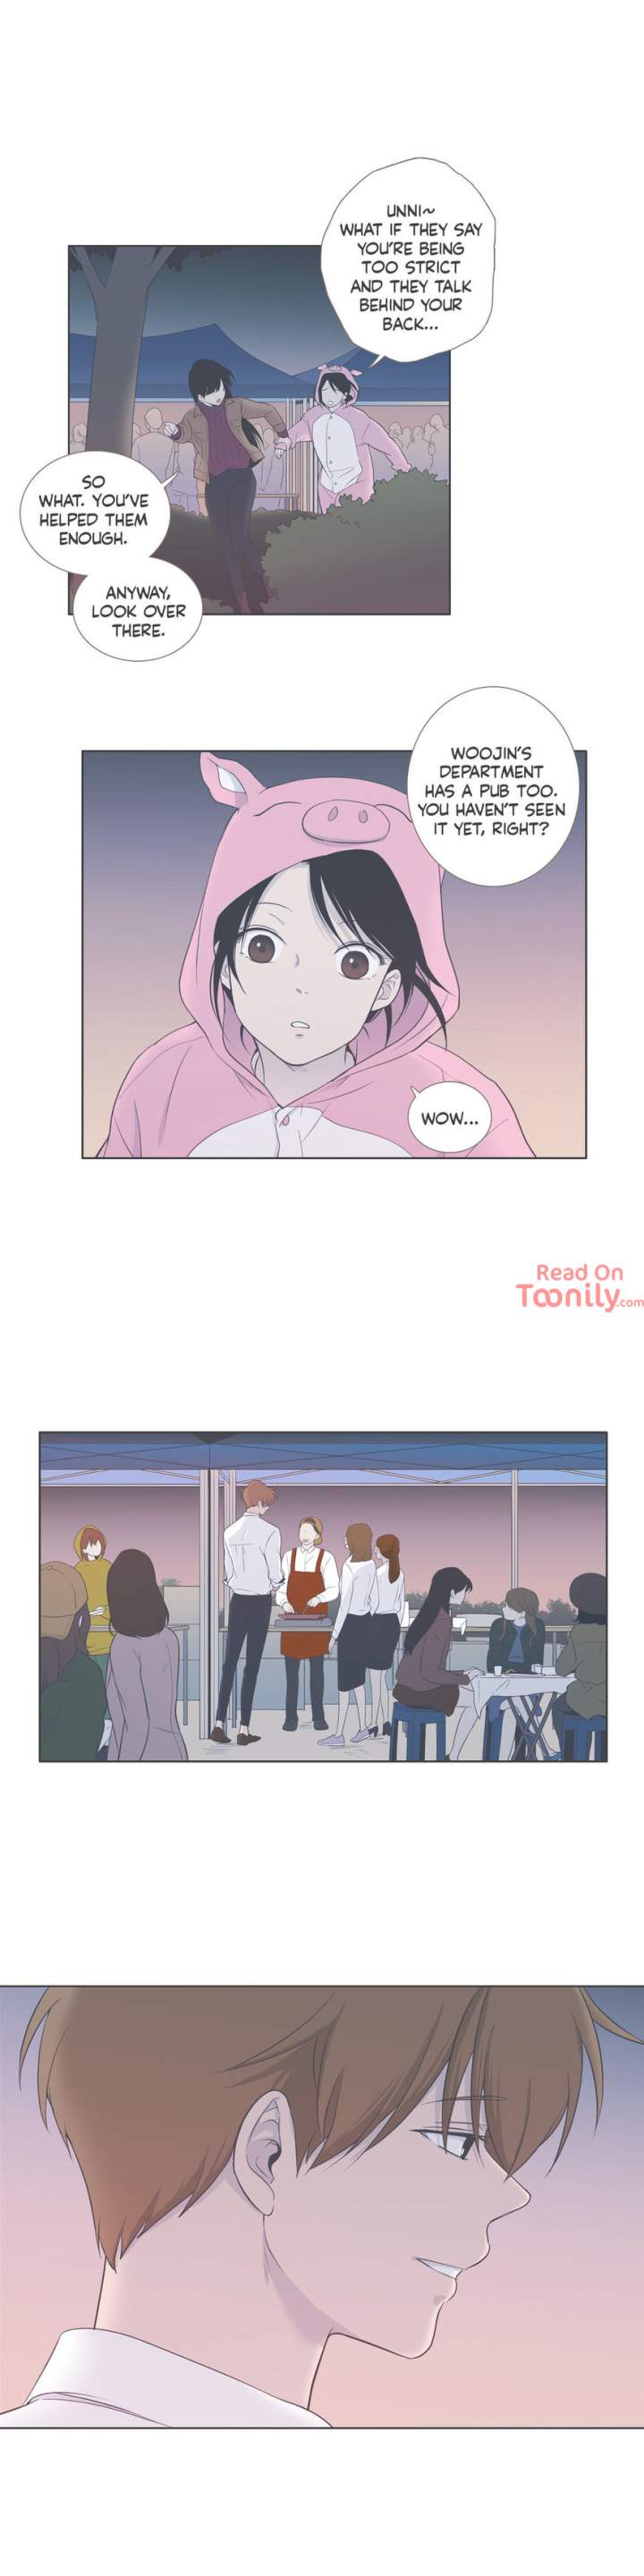 Something About Us - Chapter 60 Page 5